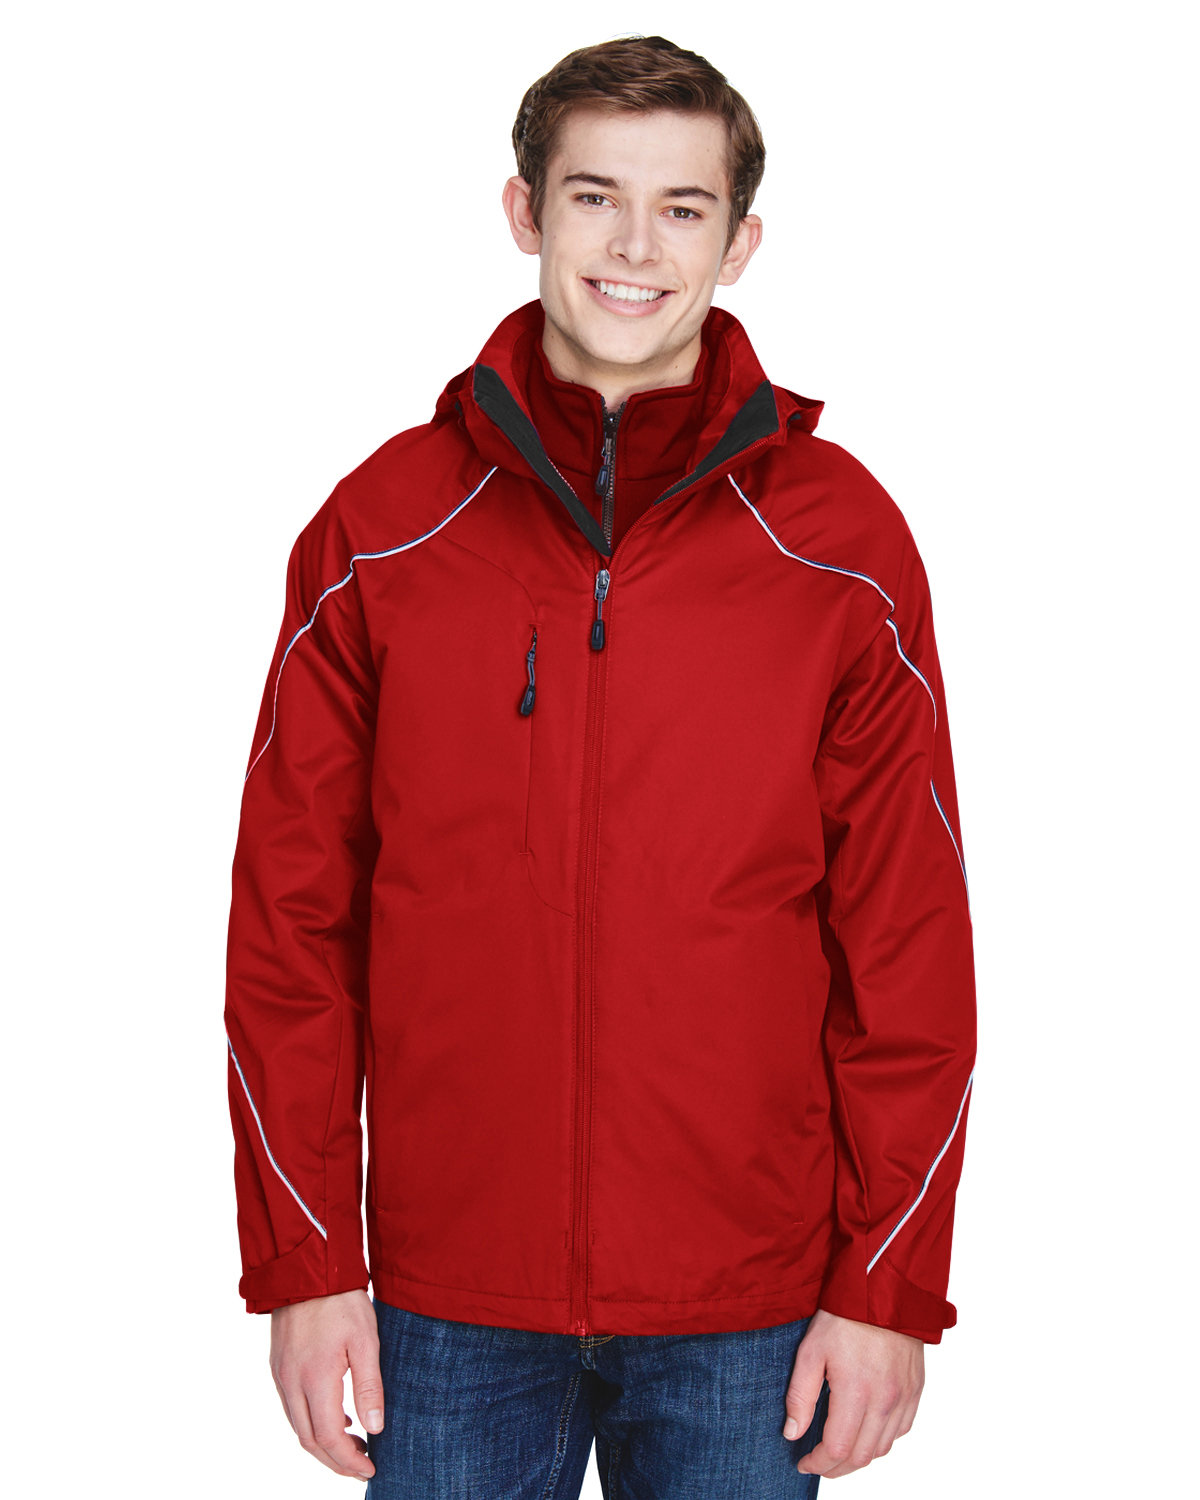 North End 88196T - Men's Tall Angle 3-In-1 Jacket With With Bonded Fleece Liner